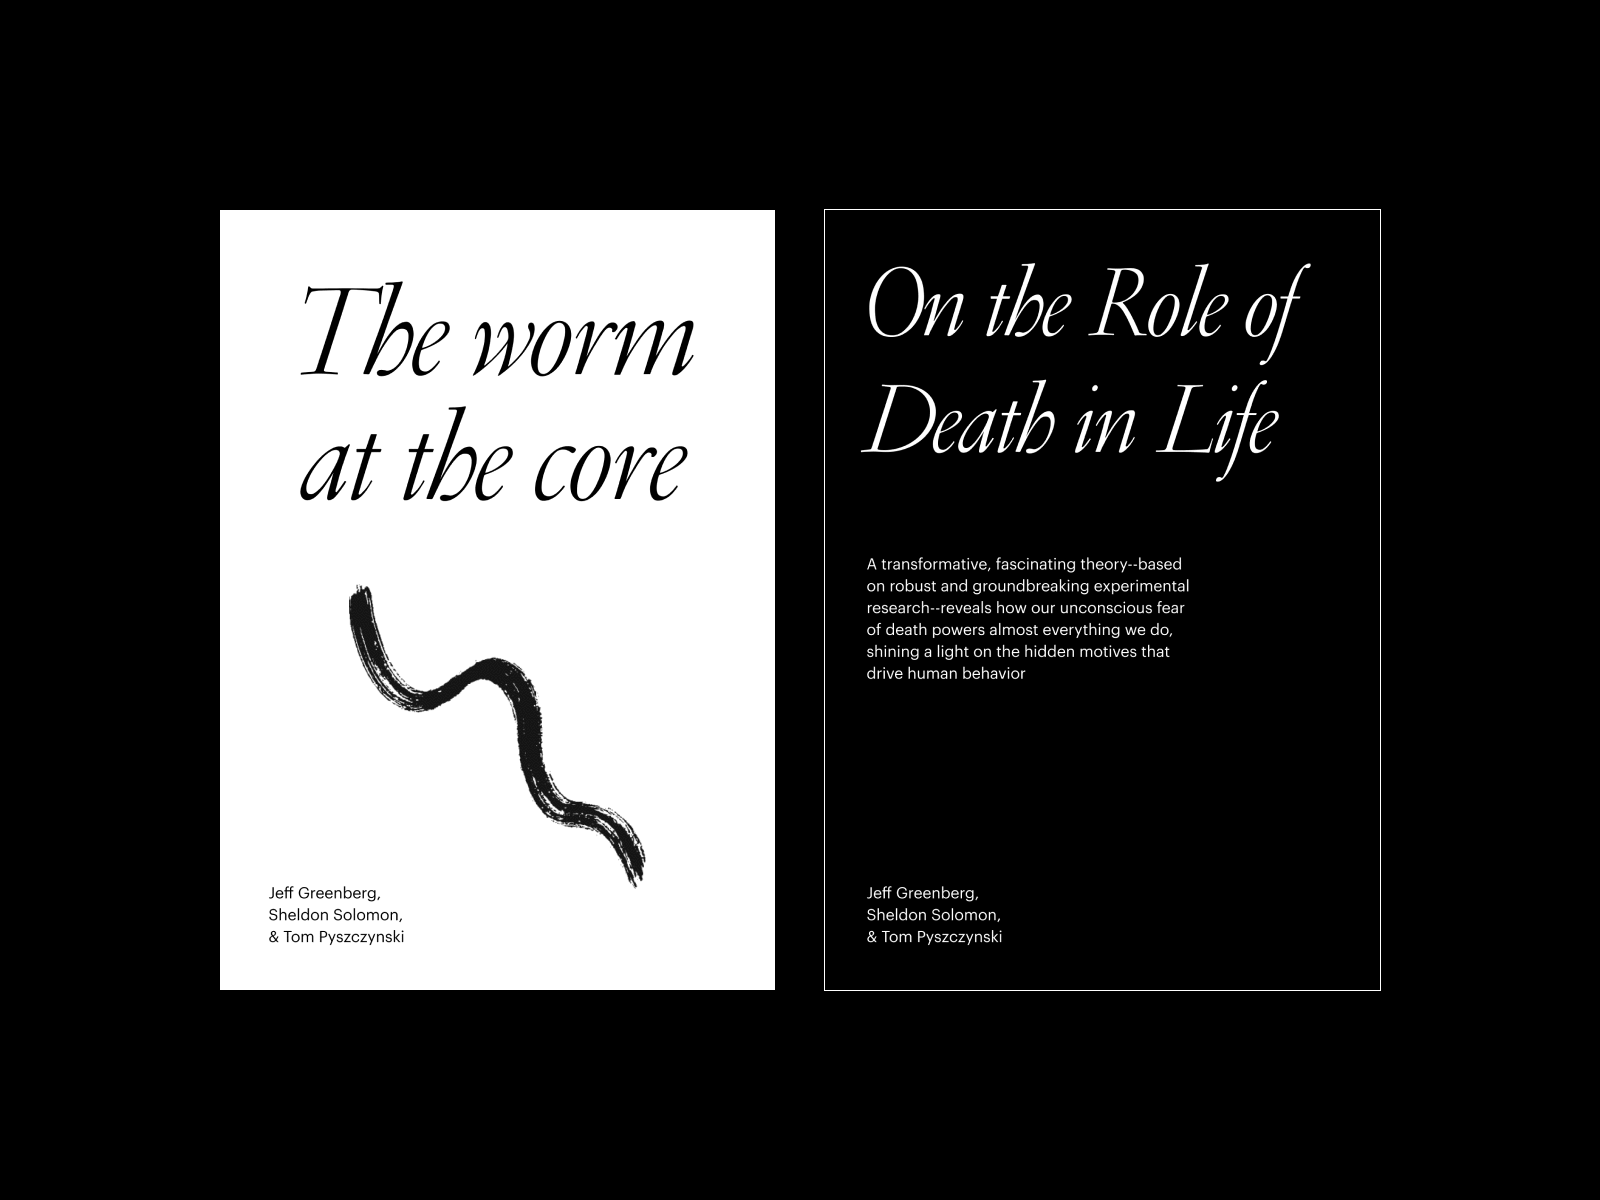 The worm at the core - Book design Exploration